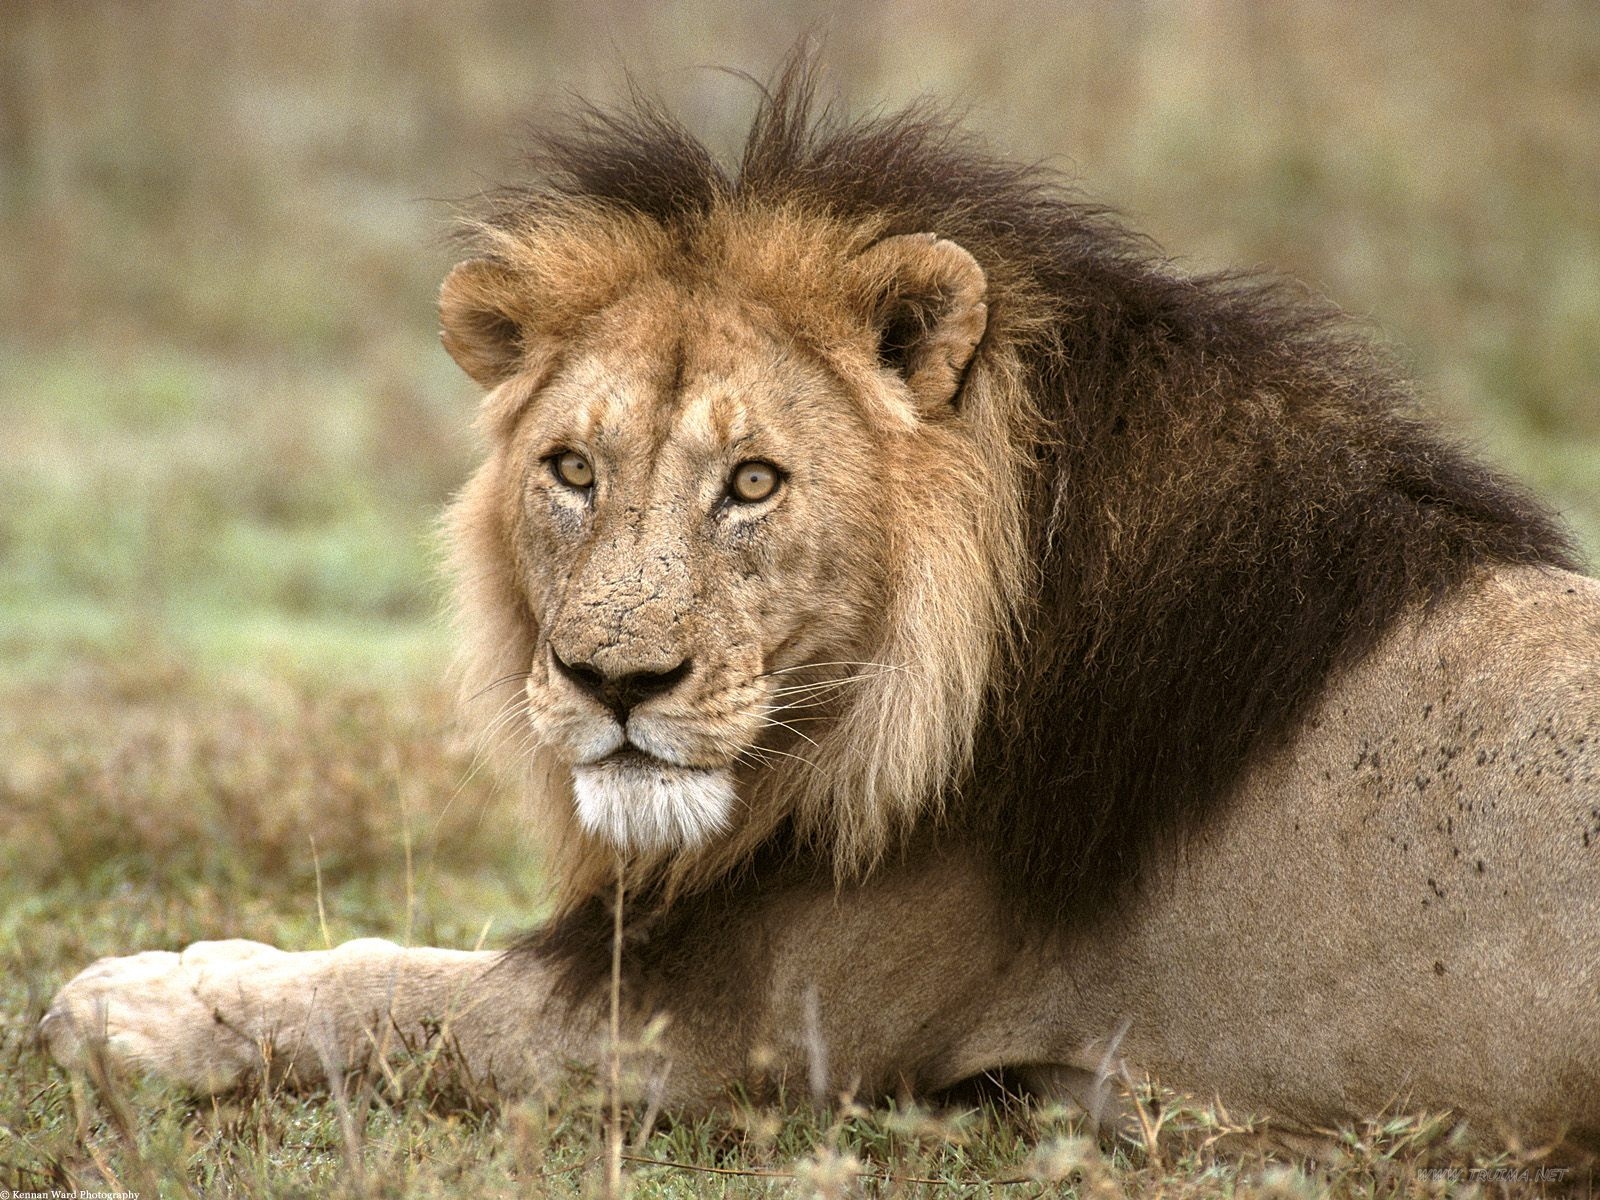 Lion Pictures That Include Stunning Image Of Adult Lions